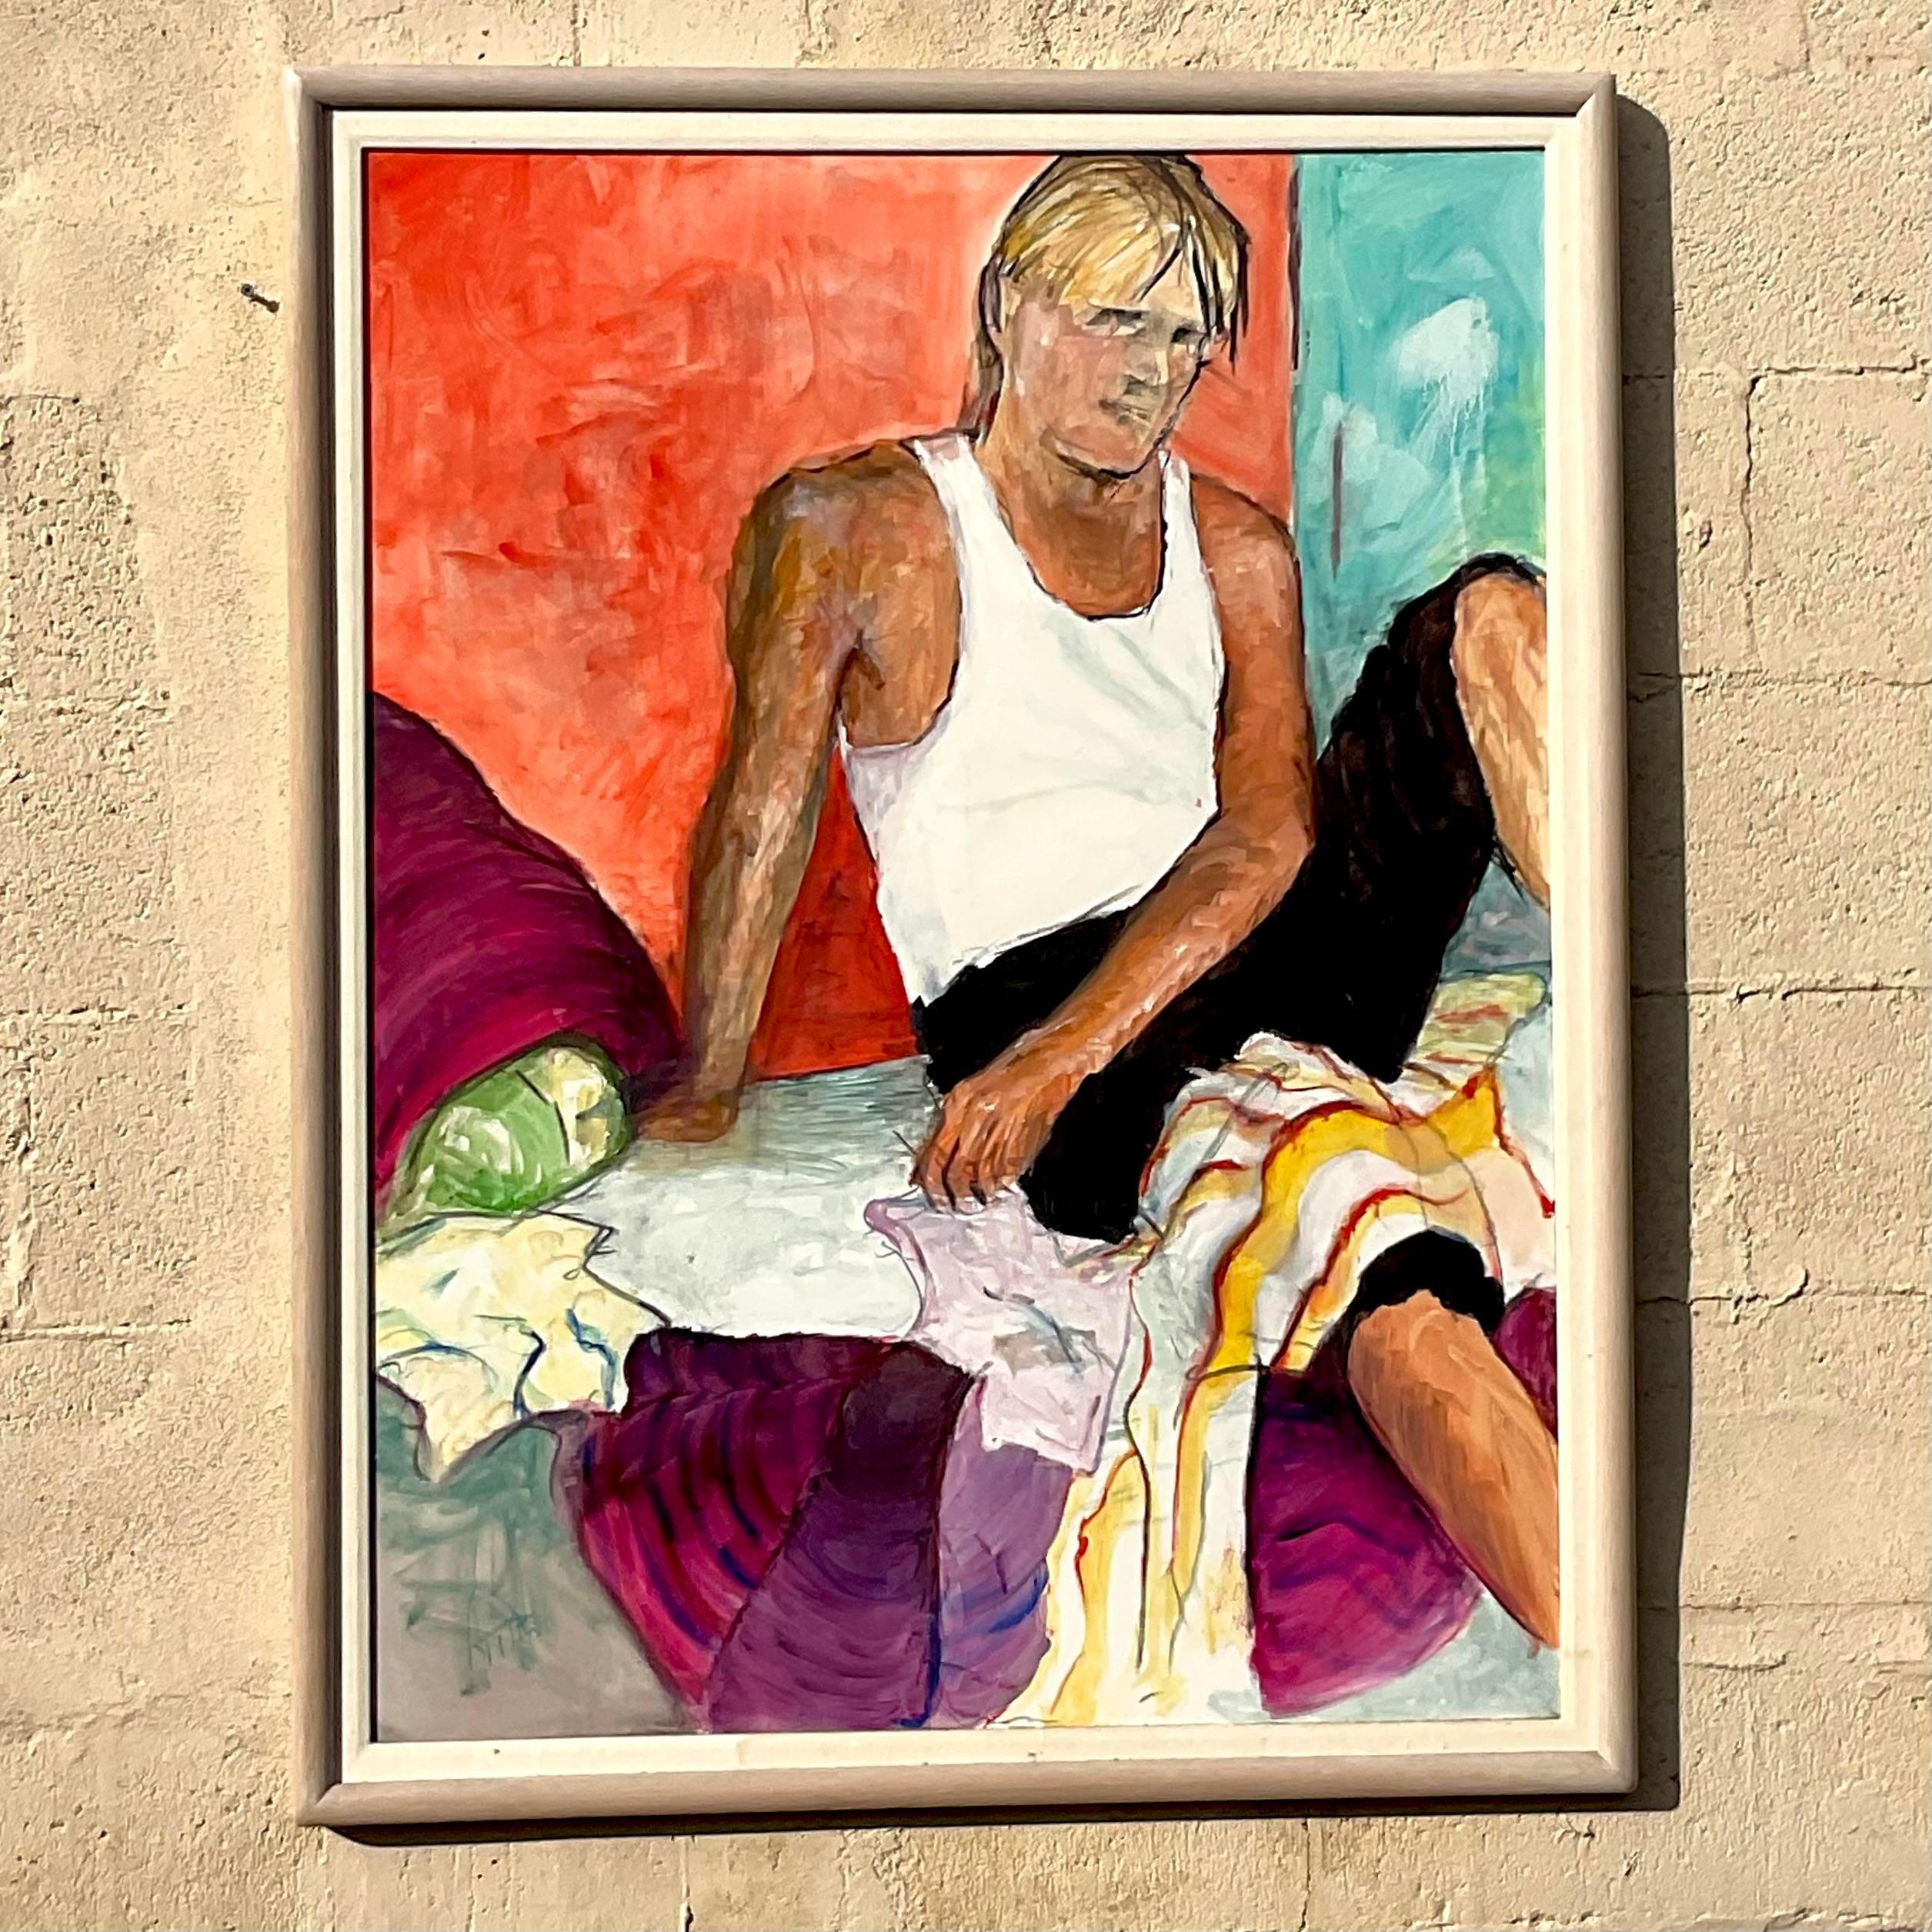 A fantastic vintage Boho original oil painting. A stunning portrait in bright clear colors. A relaxed young man seated among the pillows. Signed by the artist. Acquired from a Palm Beach estate. 